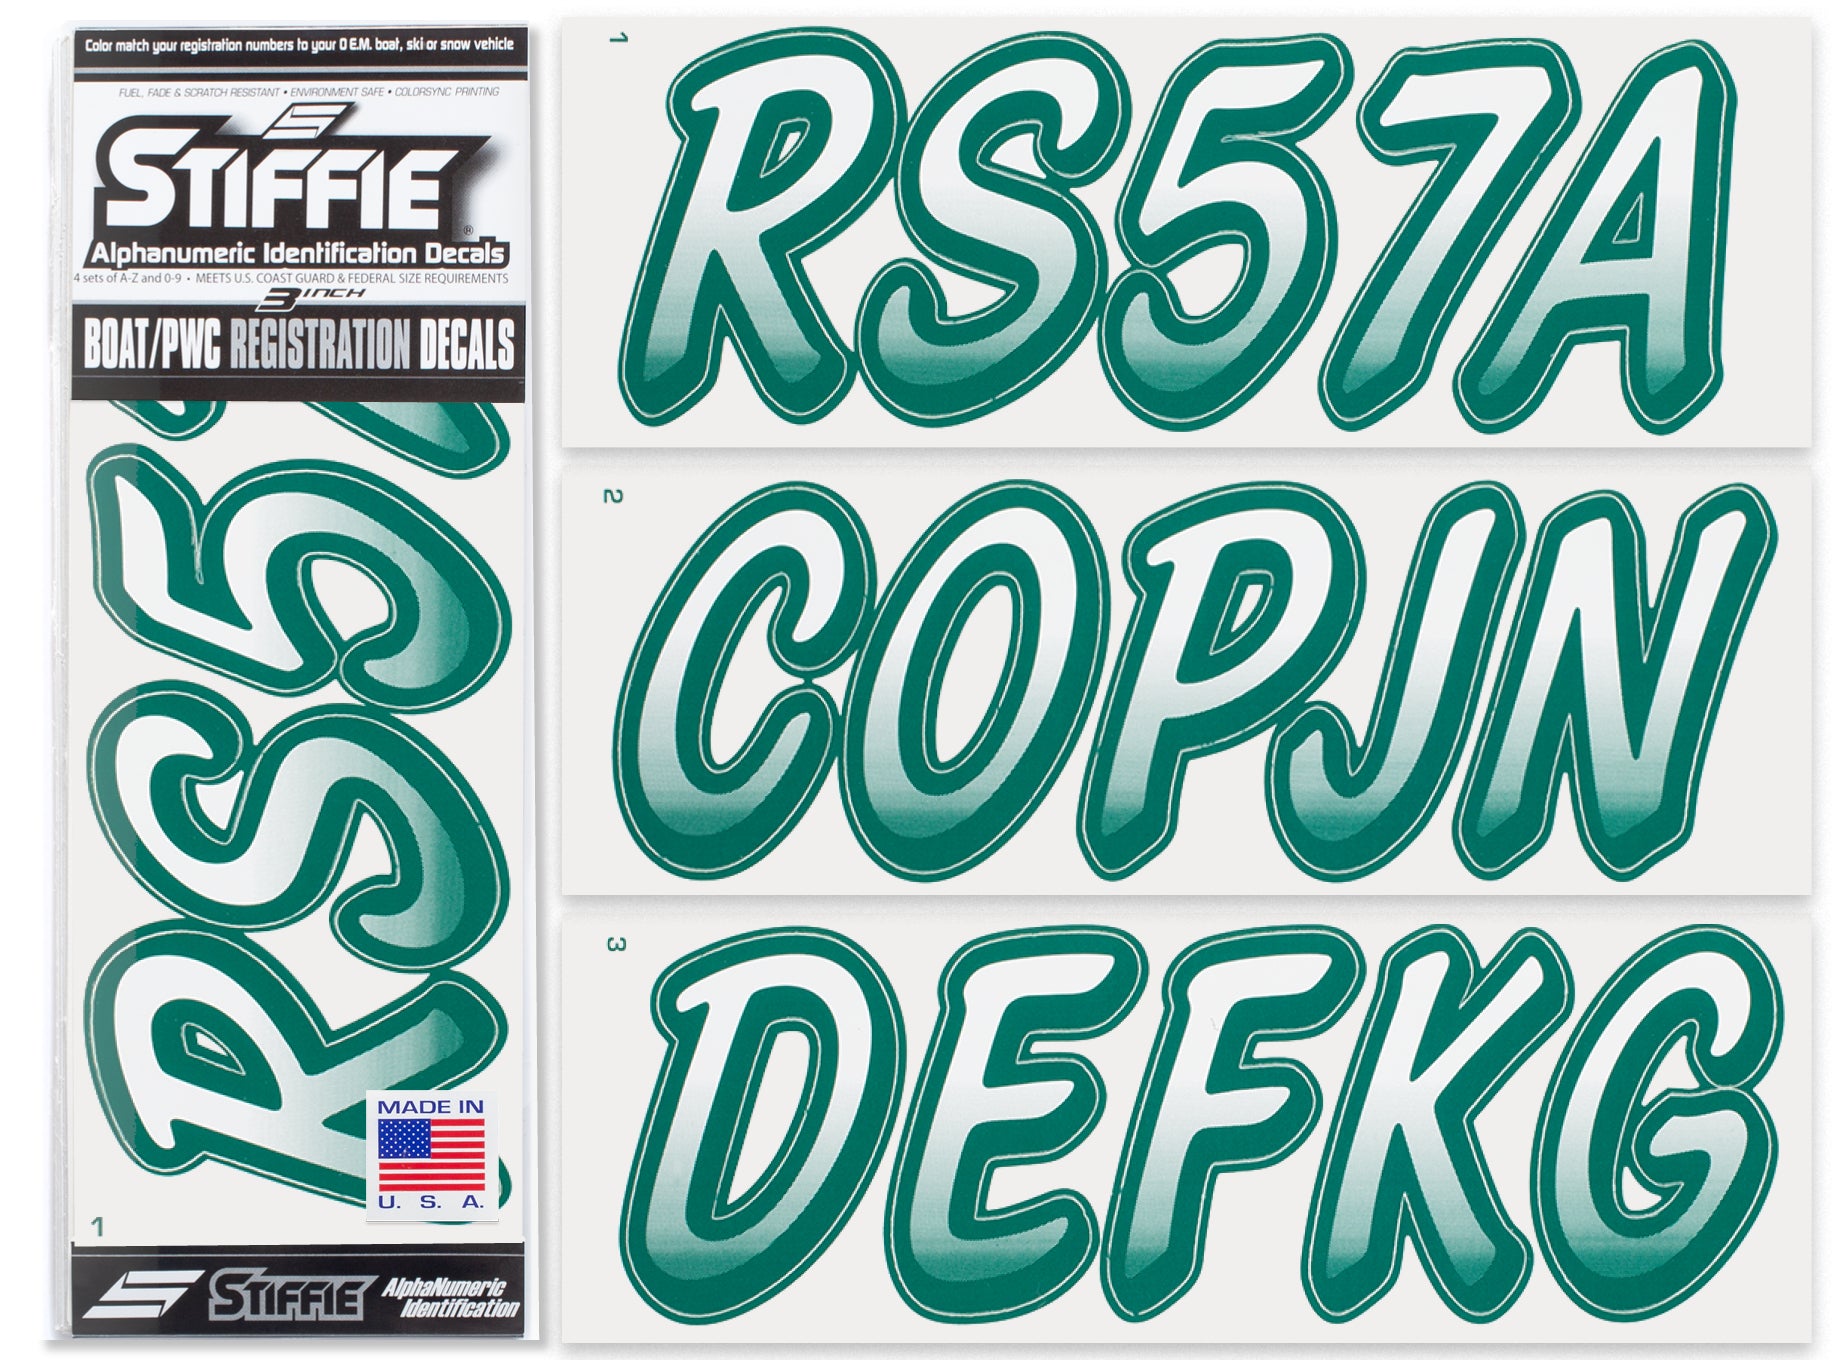 Stiffie Whipline White/Racing Green 3" Alpha-Numeric Registration Identification Numbers Stickers Decals for Boats & Personal Watercraft